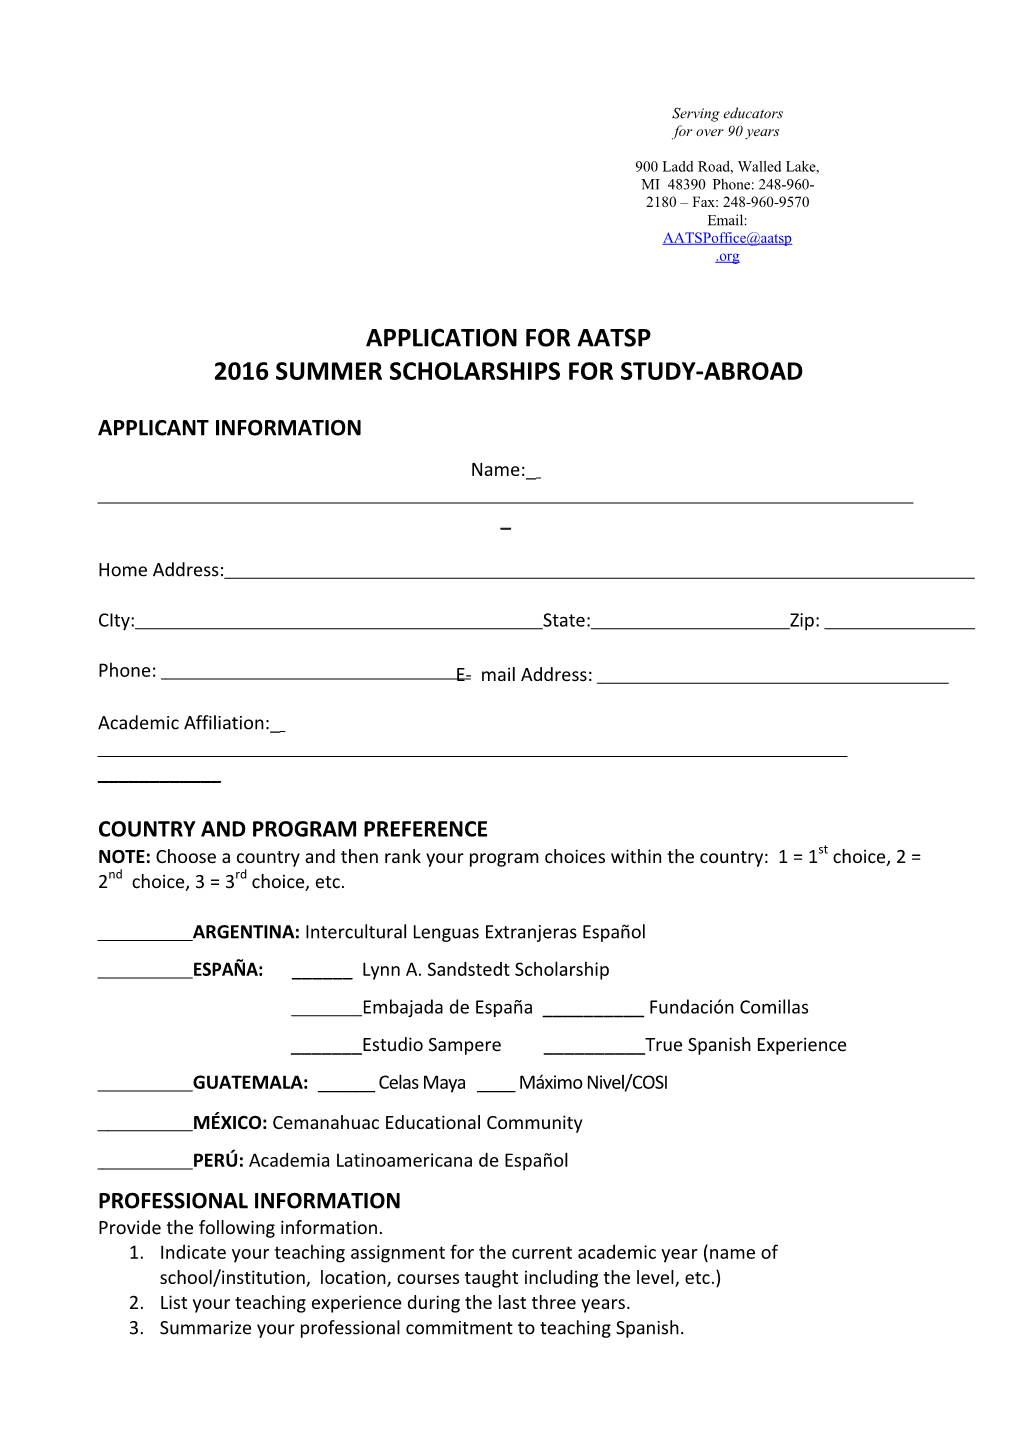 2016 Summer Scholarships for Study-Abroad